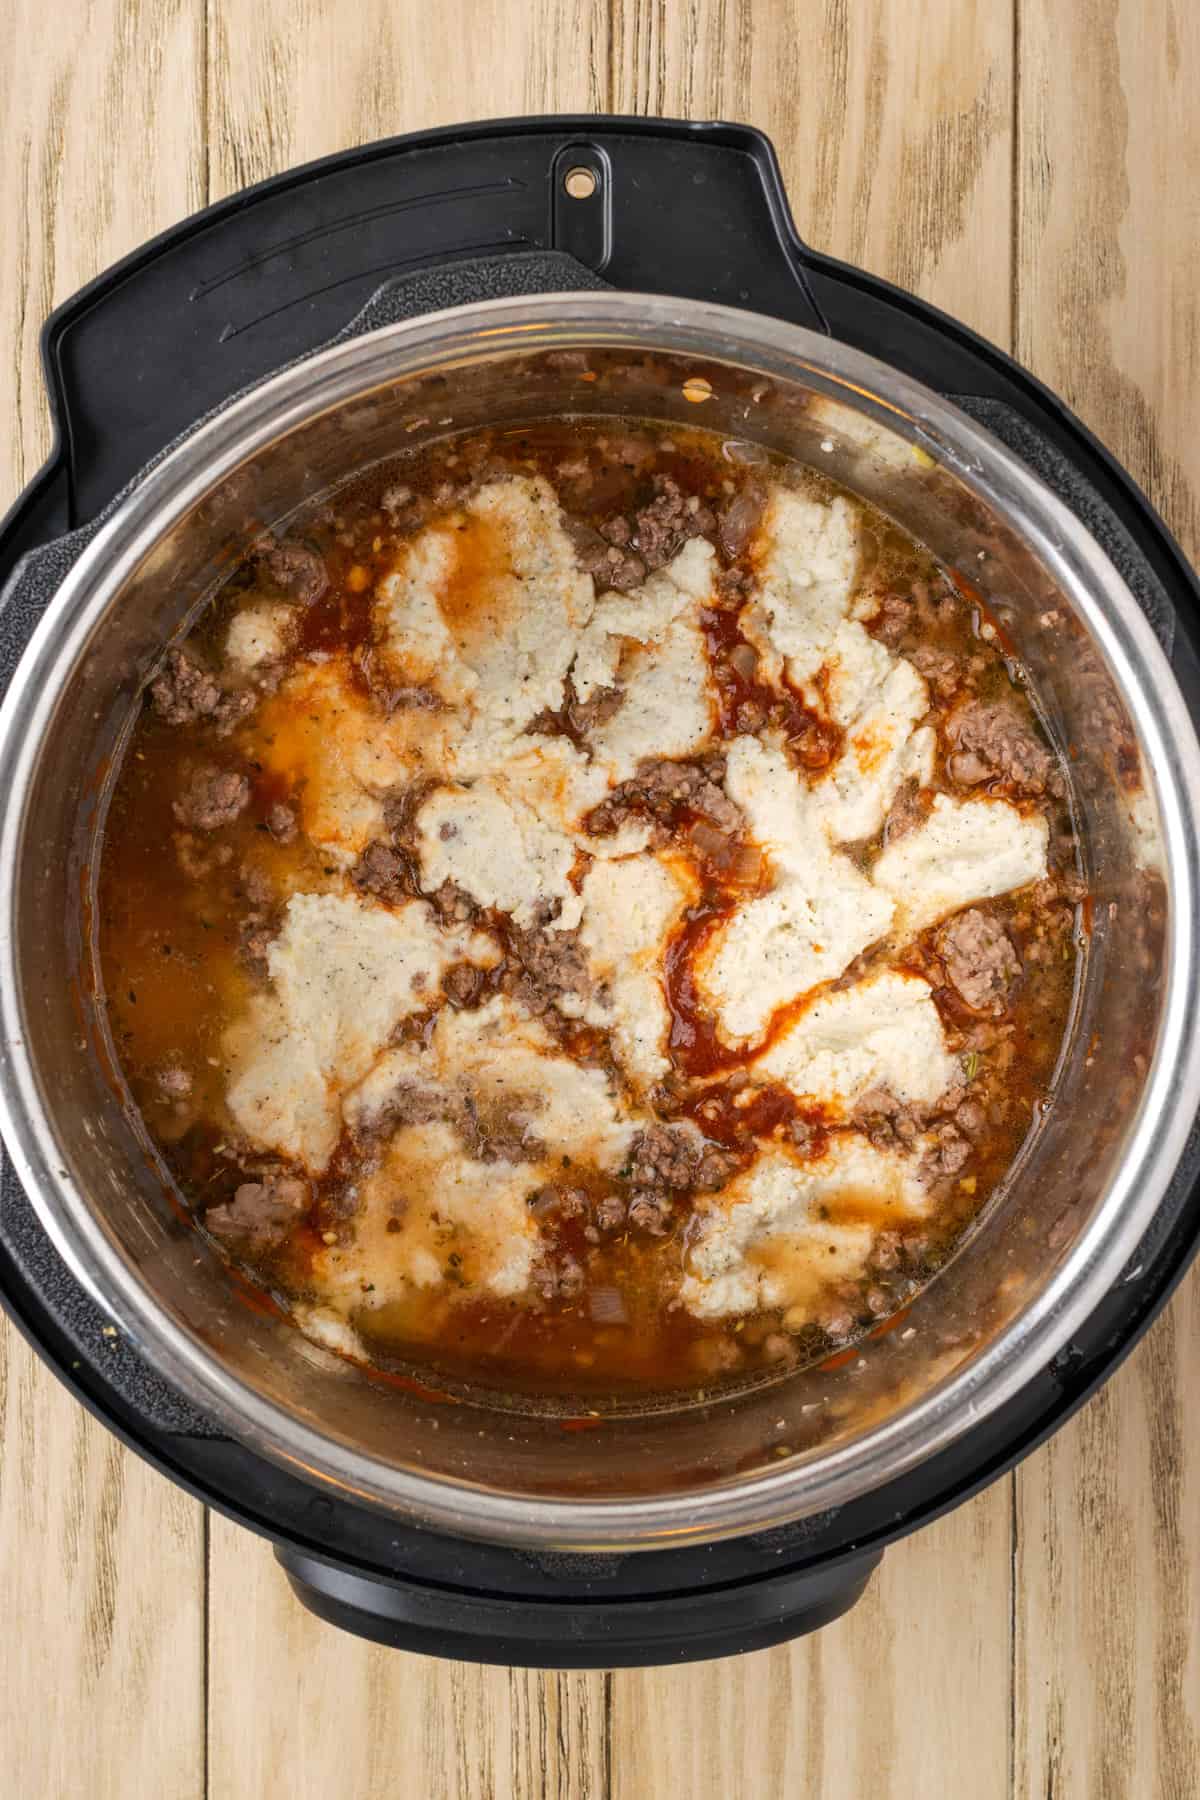 A mixture of ricotta and parmesan cheese is added over top layers of lasagna inside the instant pot.